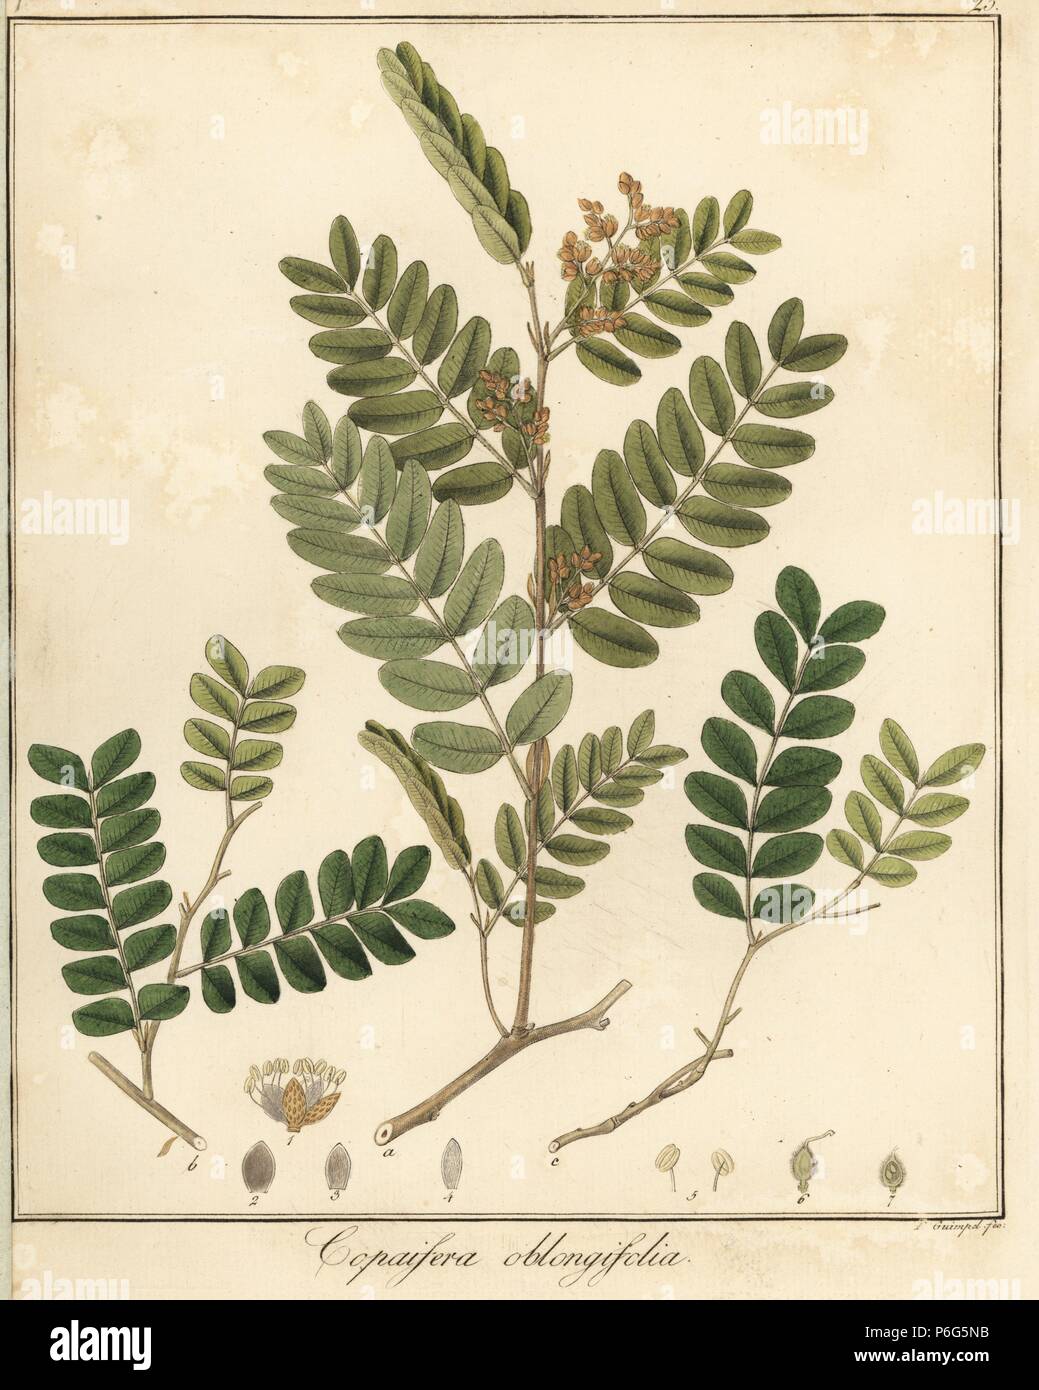 Copal or copaiba tree, Copaifera oblongifolia. Handcoloured copperplate engraving by F. Guimpel from Dr. Friedrich Gottlob Hayne's Medical Botany, Berlin, 1822. Hayne (1763-1832) was a German botanist, apothecary and professor of pharmaceutical botany at Berlin University. Stock Photo